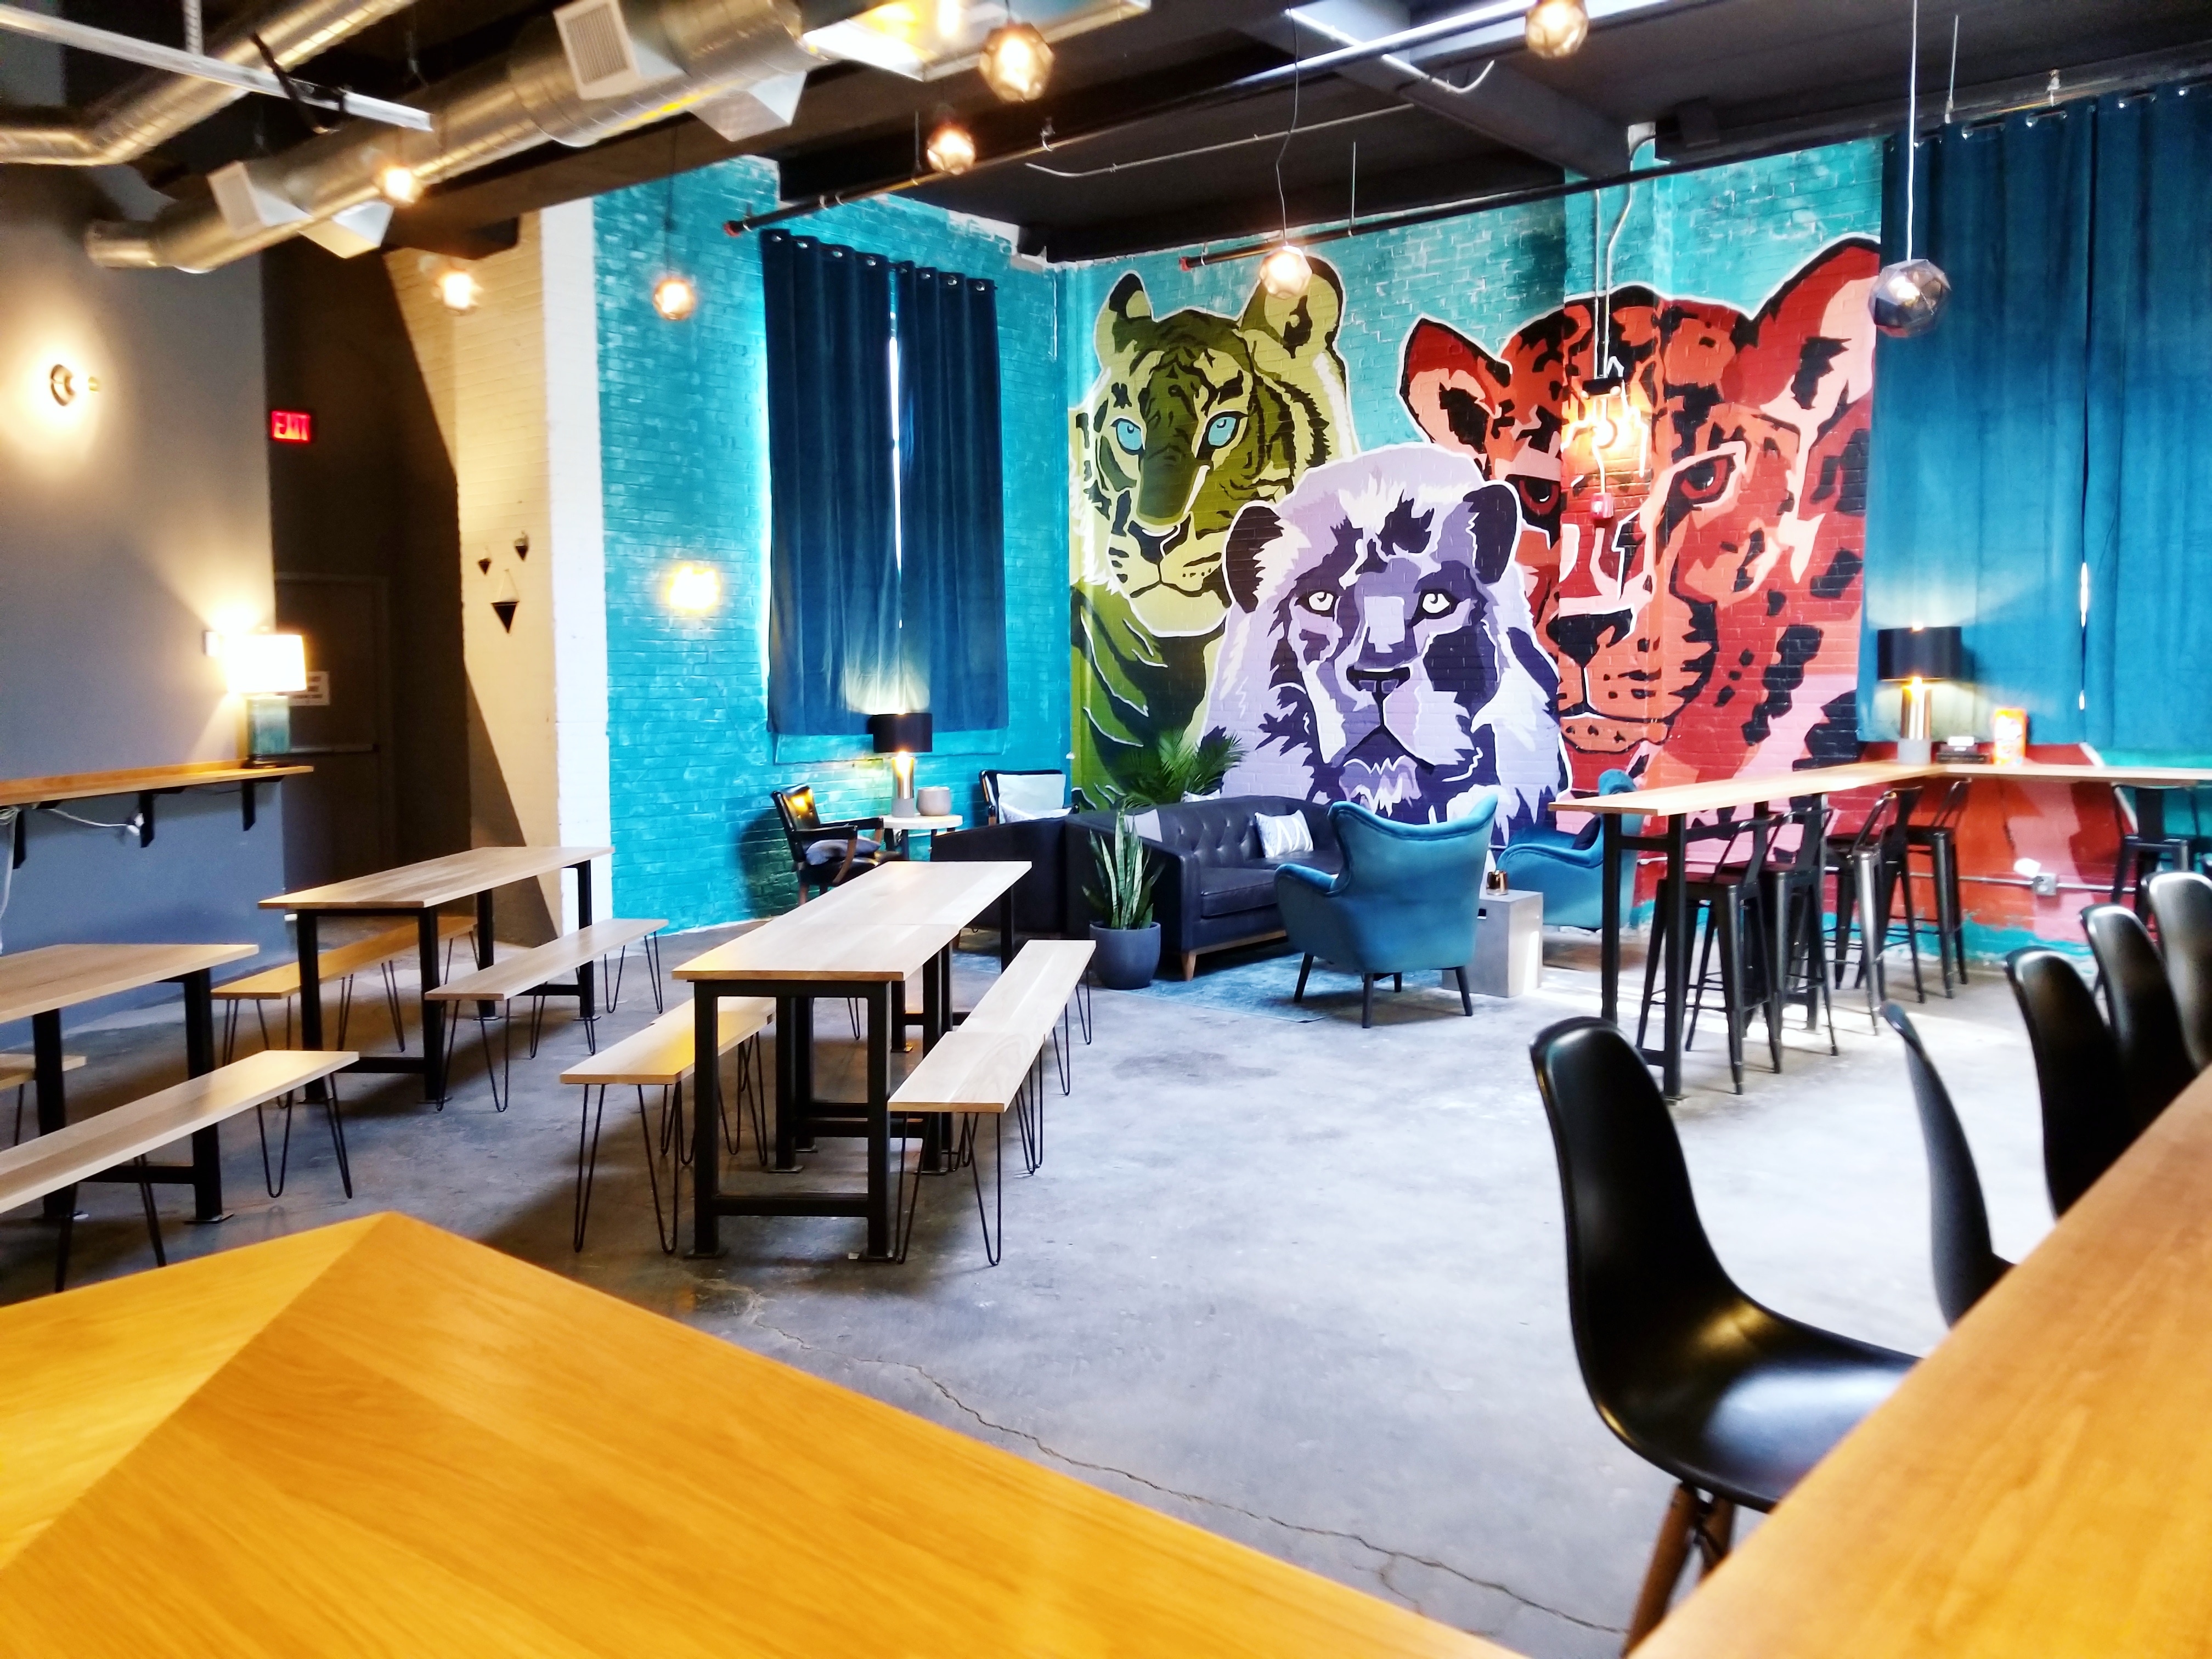 Wide view of a taproom with a mural of big, wild cats, bench seating, and bar seating